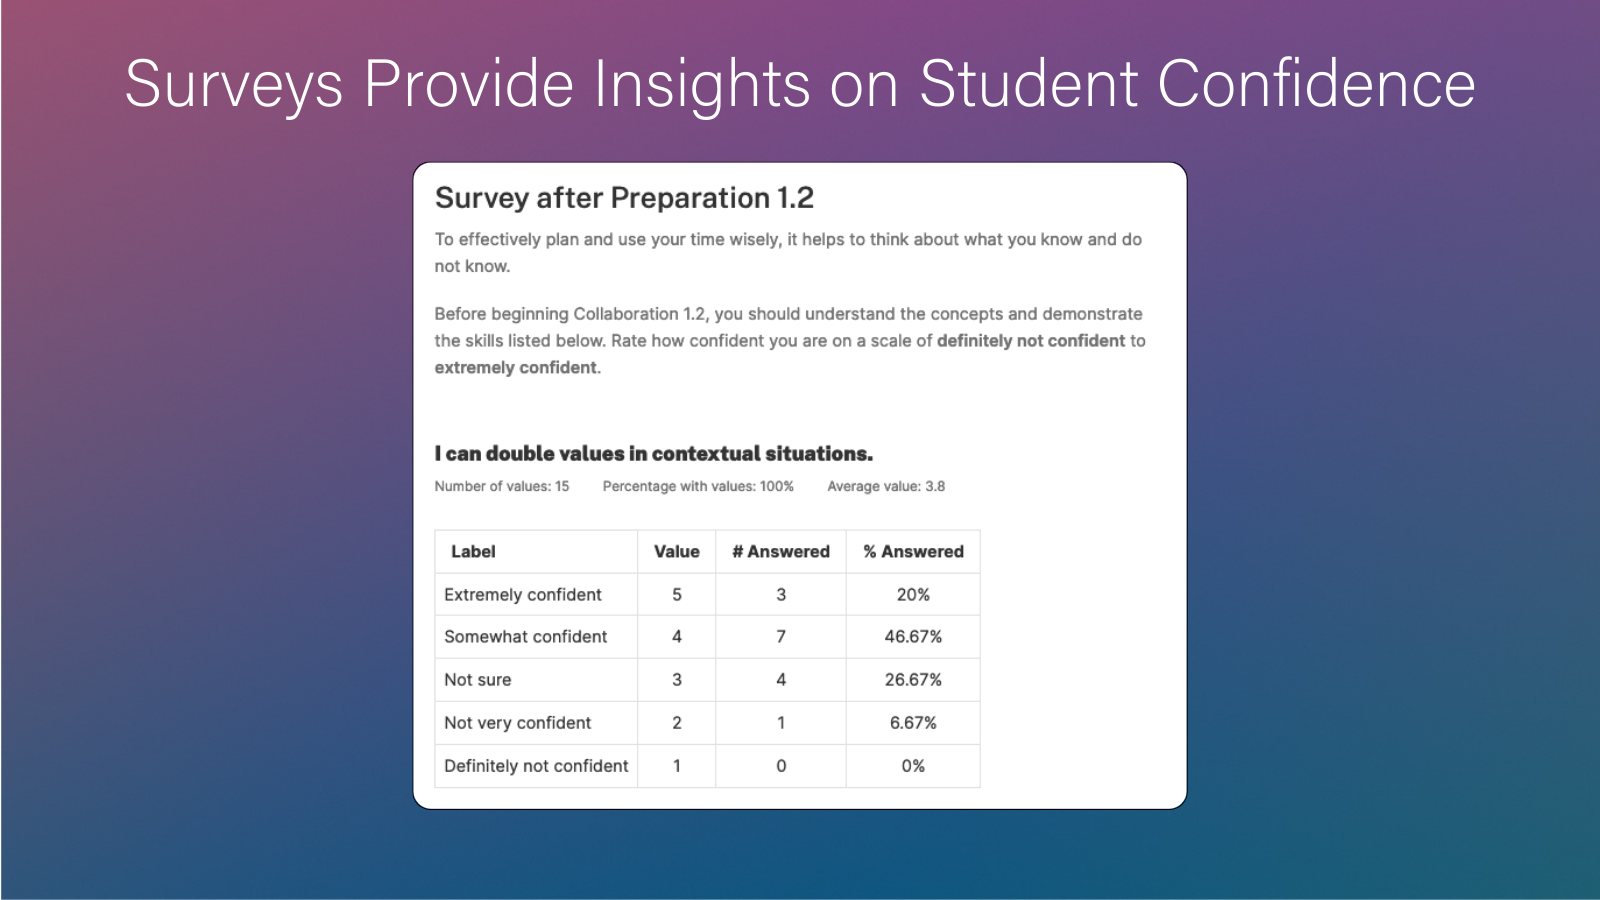 Image entitled Surveys Provide Insights on Student Confidence. Shows a screenshot of a sample confidence data reflecting aggregate class data on how confidence students feel about course content before they begin the collaboration stage of the learning cycle.